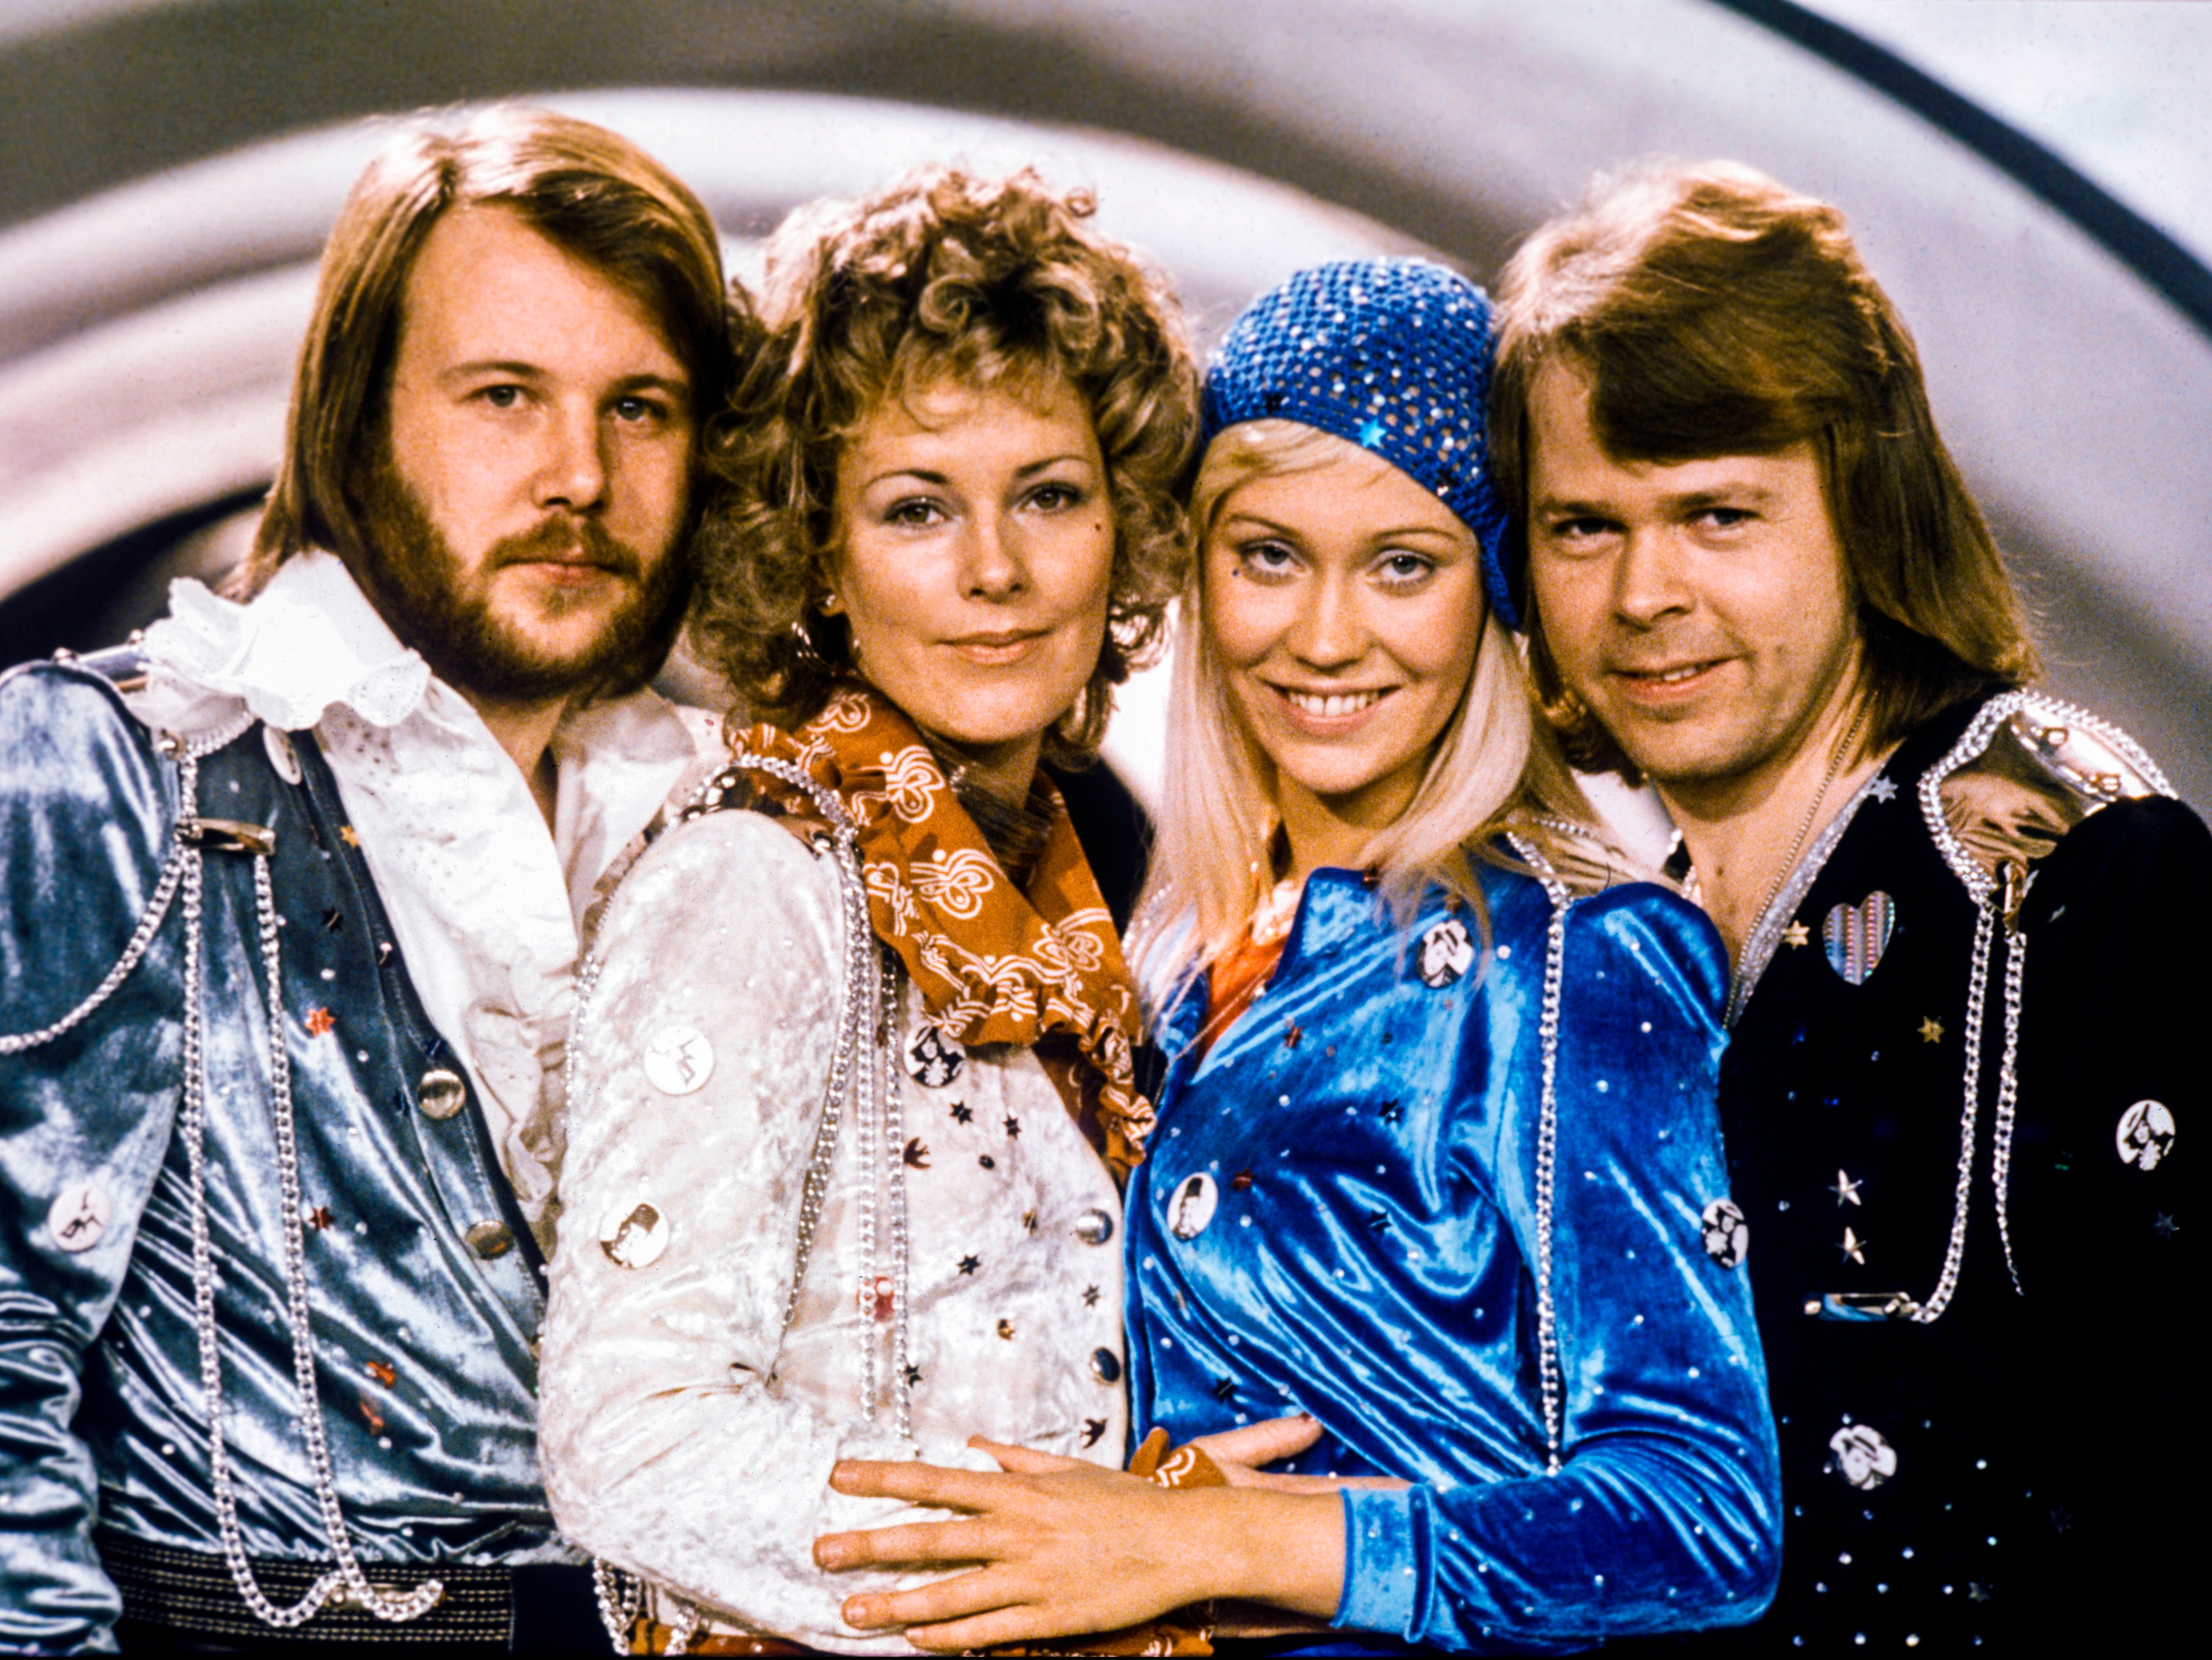 Field of battle: Abba strike a pose after winning the Swedish branch of the Eurovision Song Contest in 1974